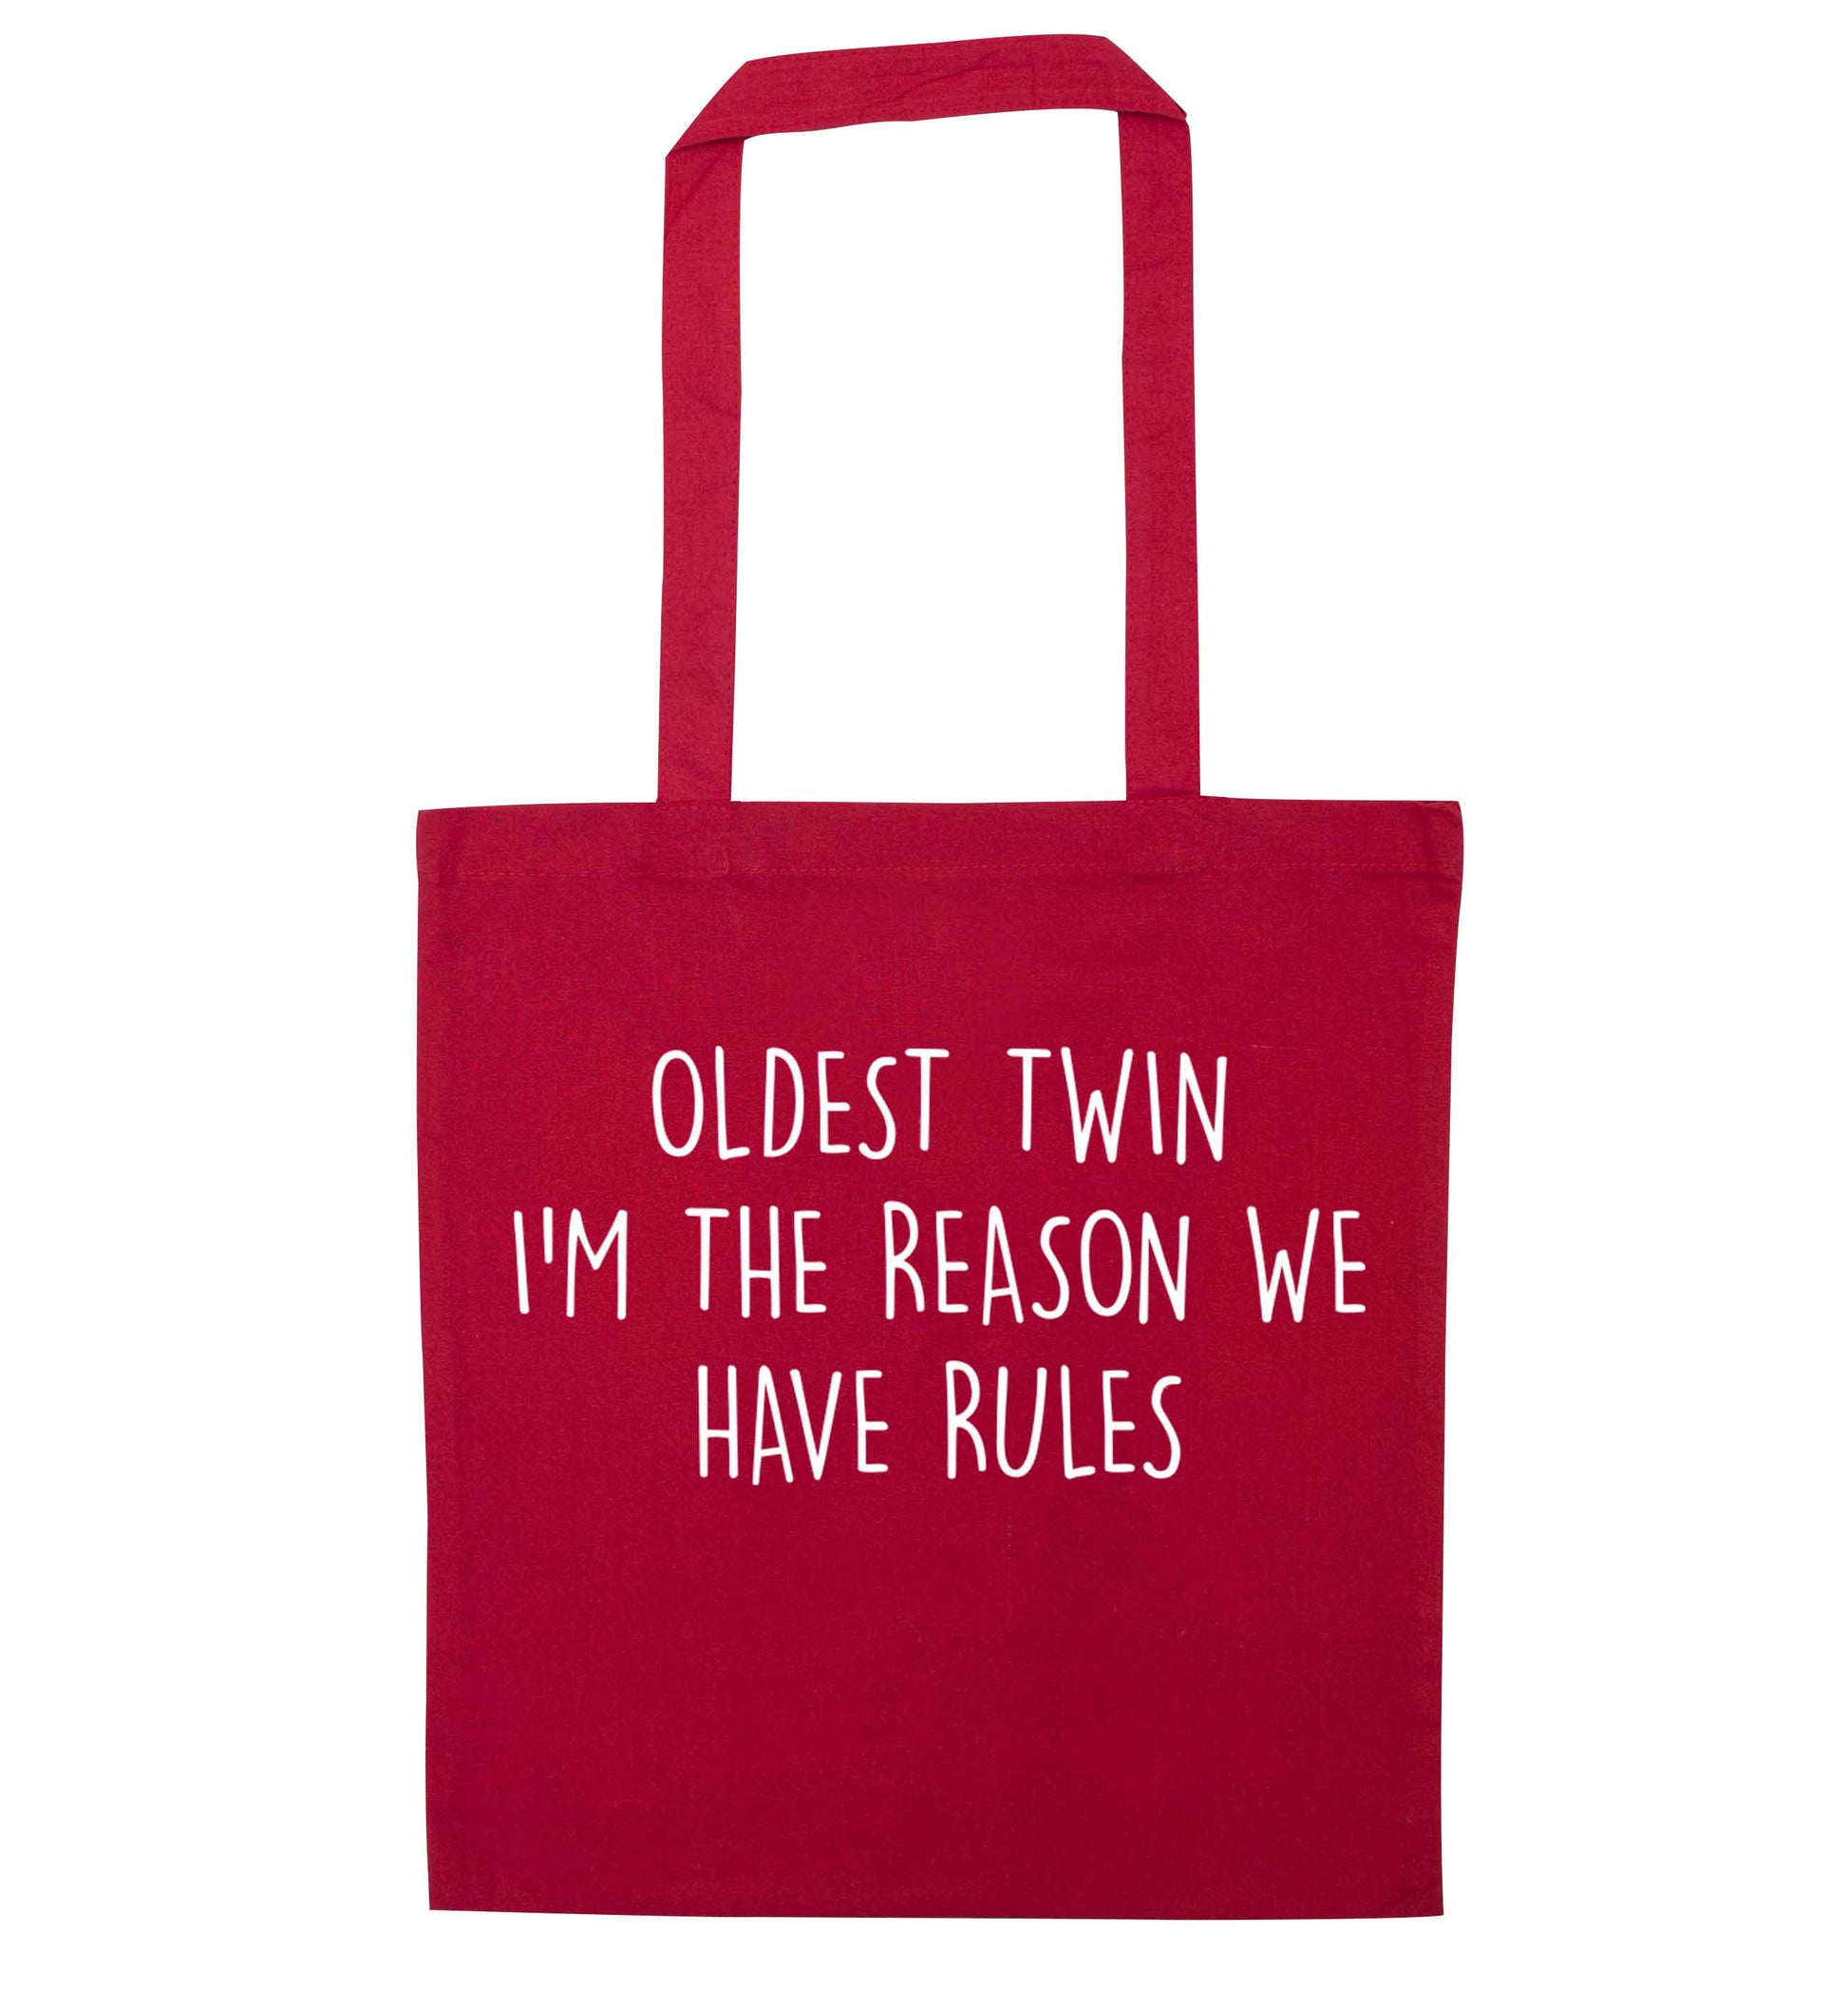 Oldest twin I'm the reason we have rules red tote bag